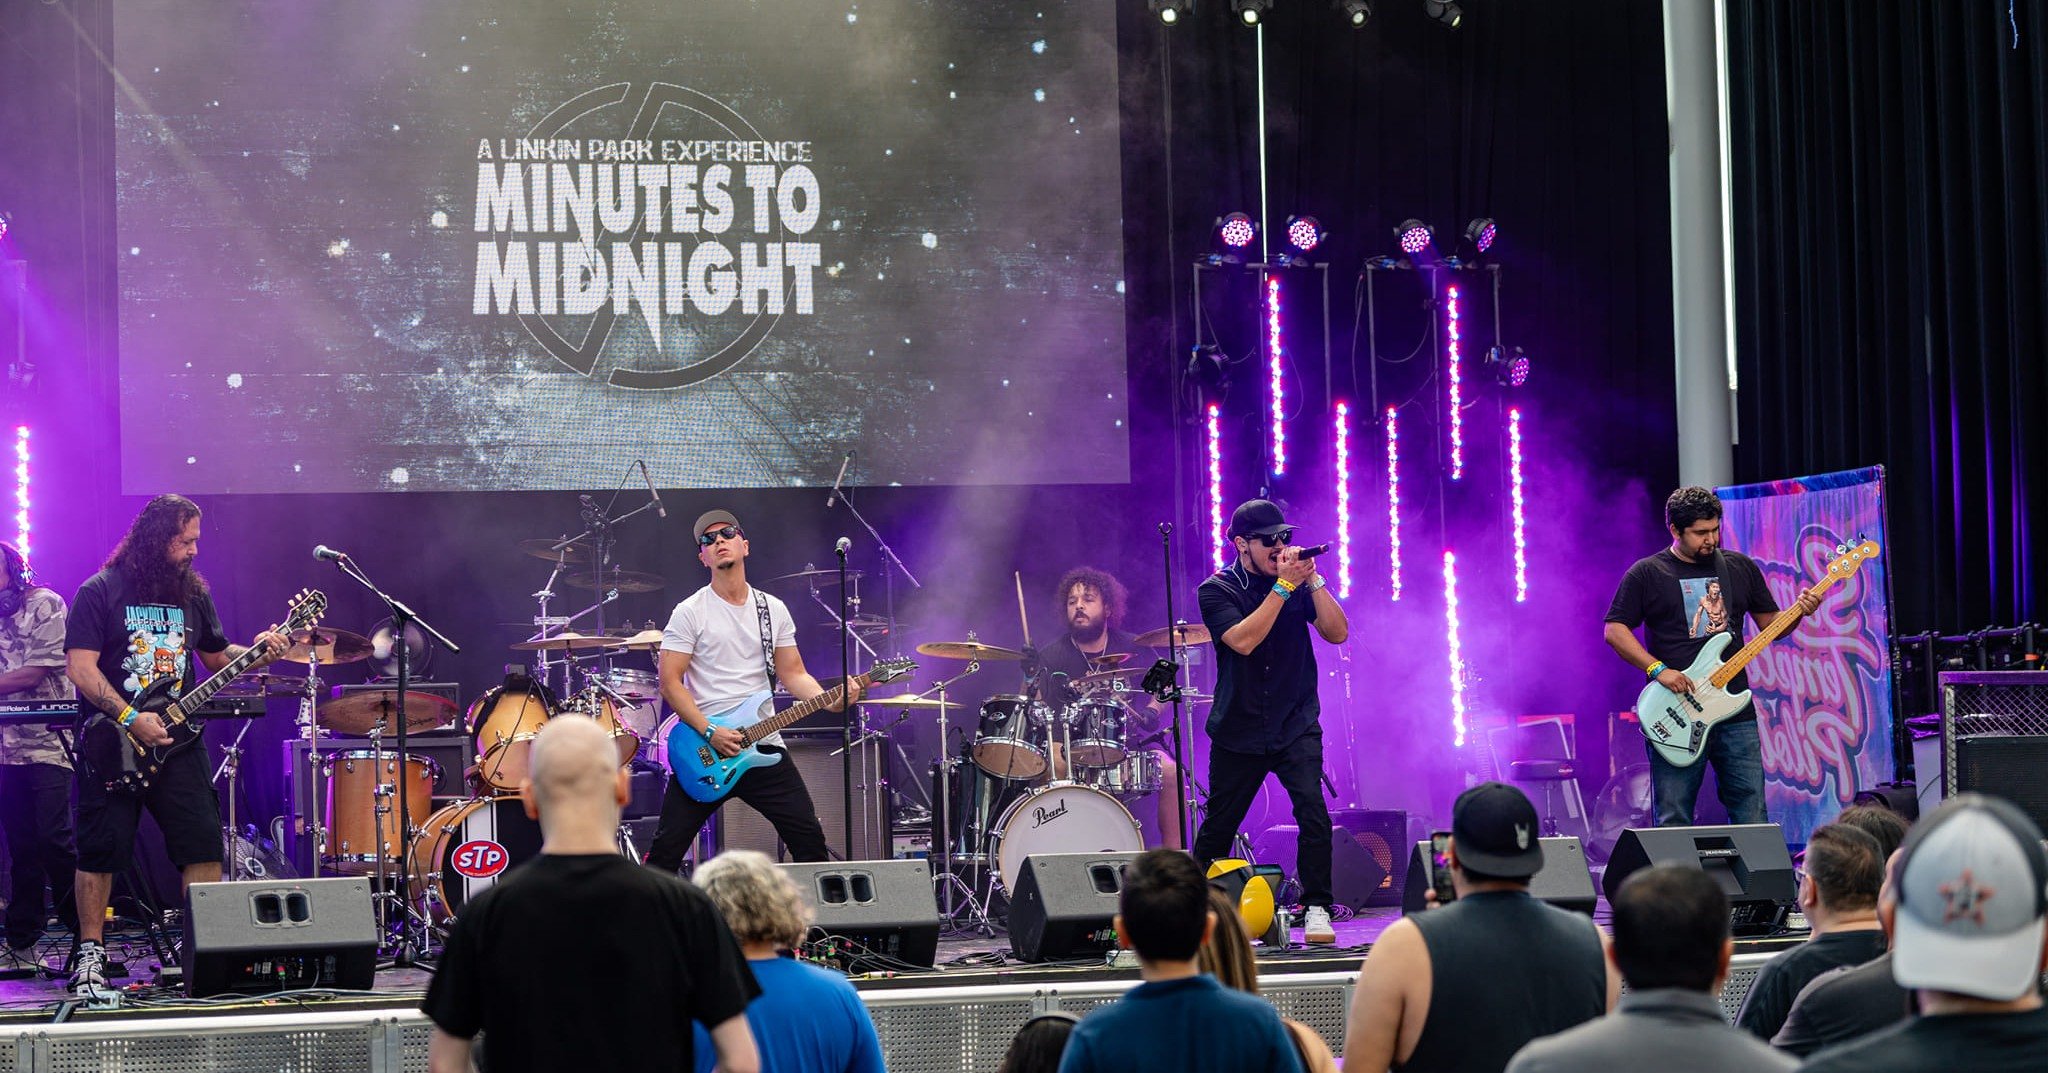 🎸 Join us for a special Mother's Day Edition Sunday Funday at Warehouse Live Midtown with Minutes To Midnight, Stellar, Paraleaf. Doors at 2pm with the show starting at 3pm. Get your FREE GA Tickets before tomorrow at warehouselivemidtown.com 
.
.
#